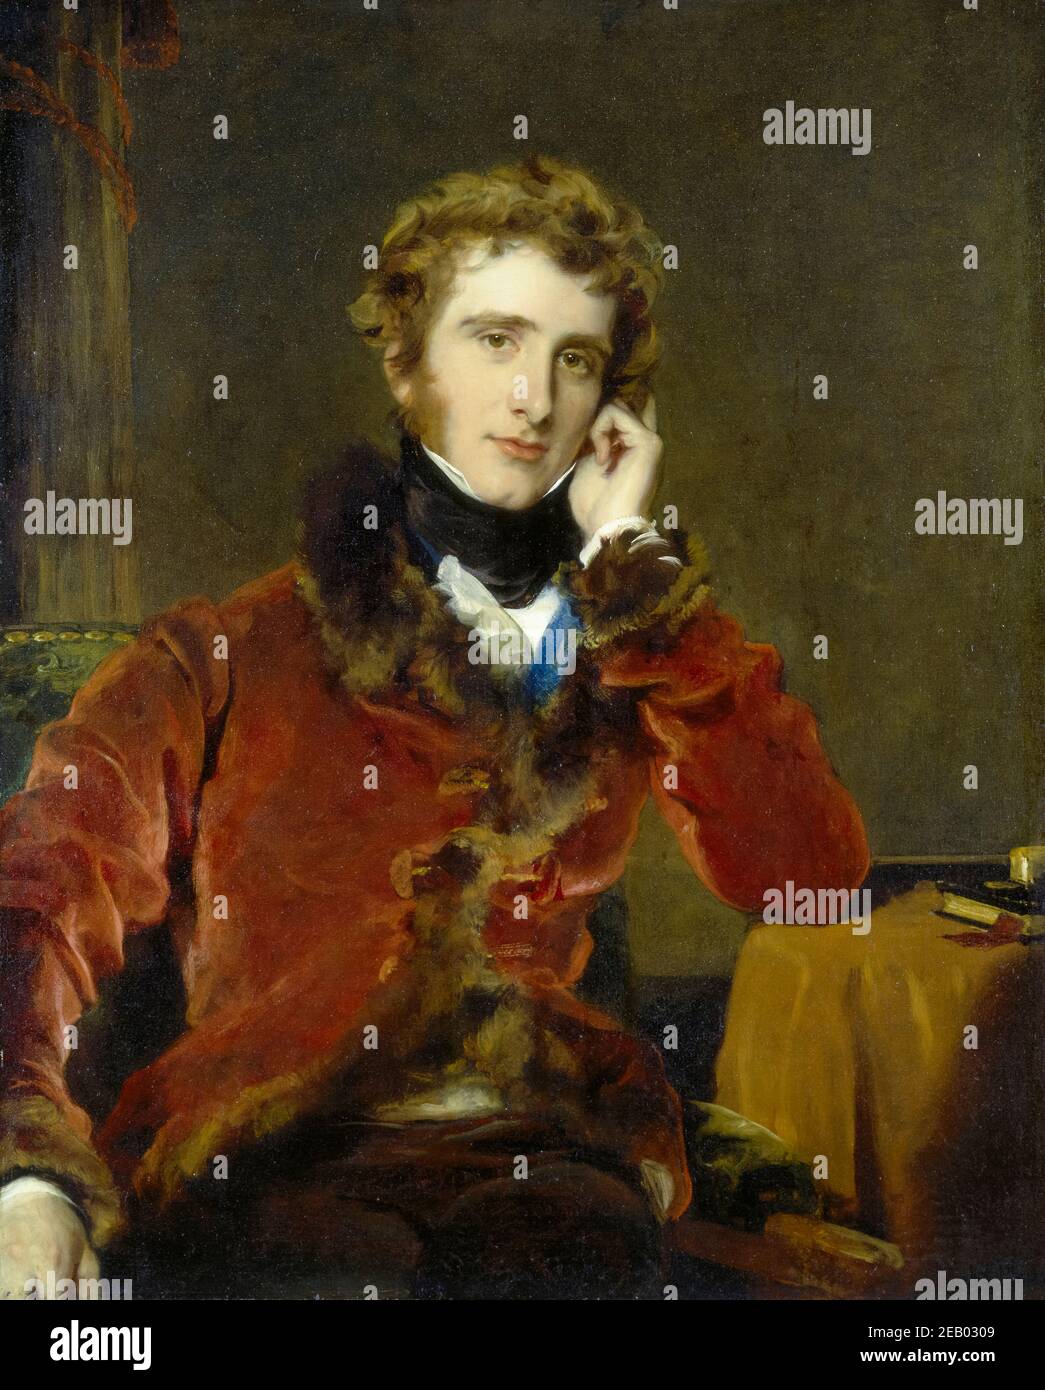 Sir Thomas Lawrence, George James Welbore Agar-Ellis, (1797-1833) later 1st Lord Dover, portrait painting, 1823-1824 Stock Photo